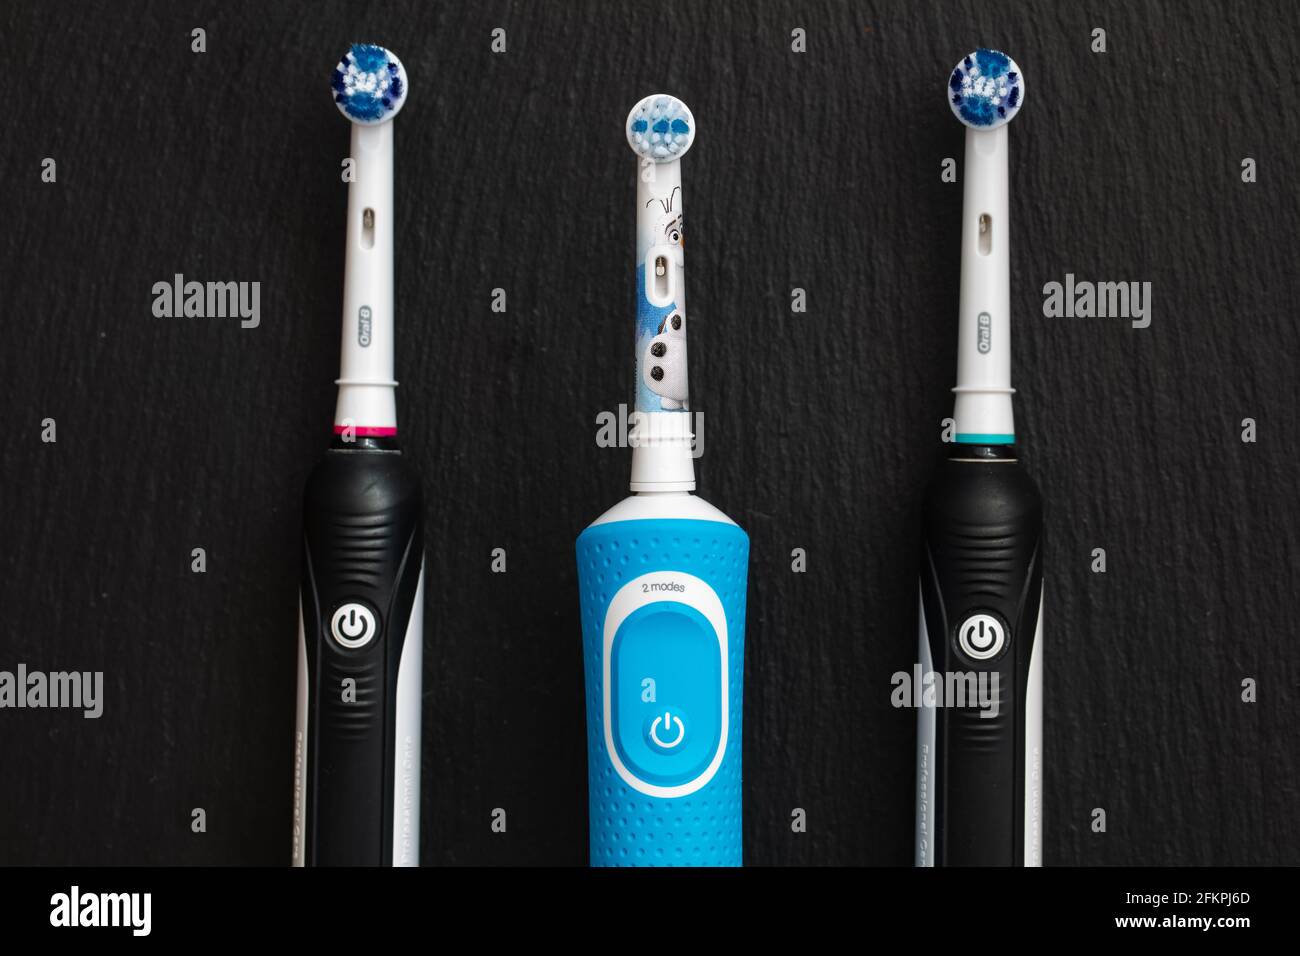 Tutor Tolk Slang Frankfurt, Germany - May 1, 2021: Electric toothbrush Oral-B Cross Action PRO  750 black edition and Braun Oral-B rechargeable toothbrush for kids 3+ y  Stock Photo - Alamy